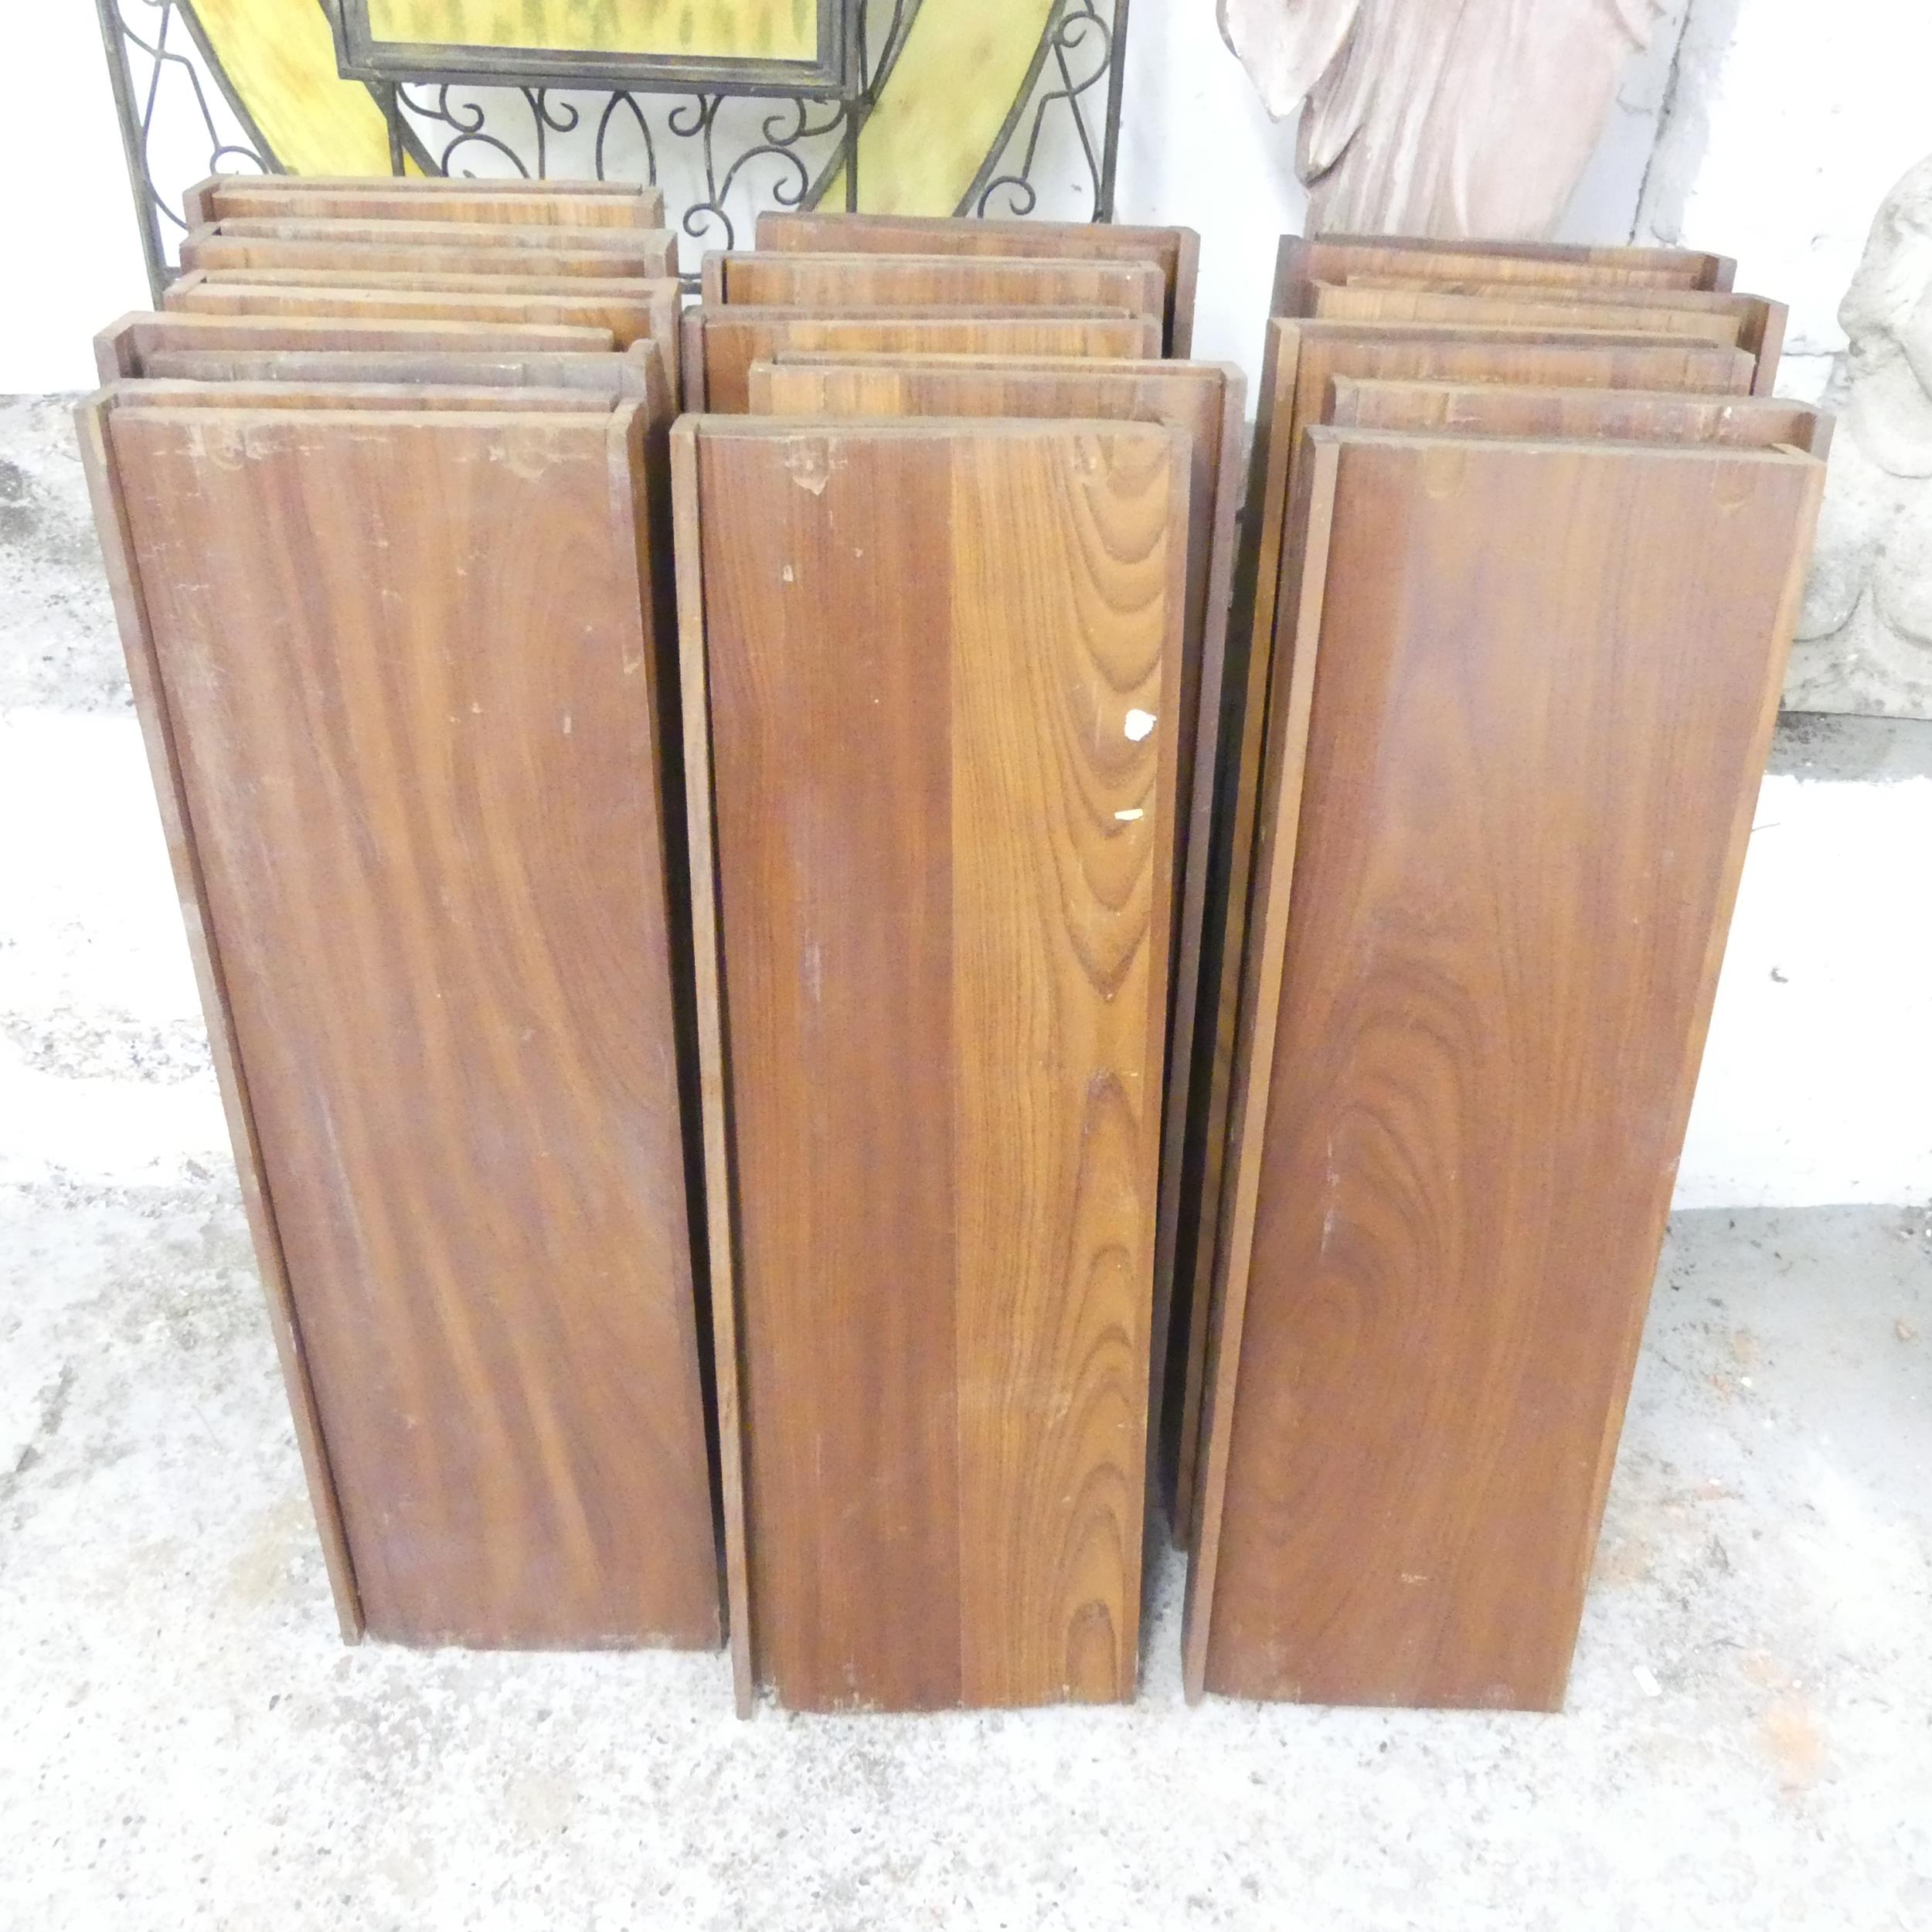 Thirty teak book shelves, ex University library. Each 91.5x26x6cm. Good used condition. To